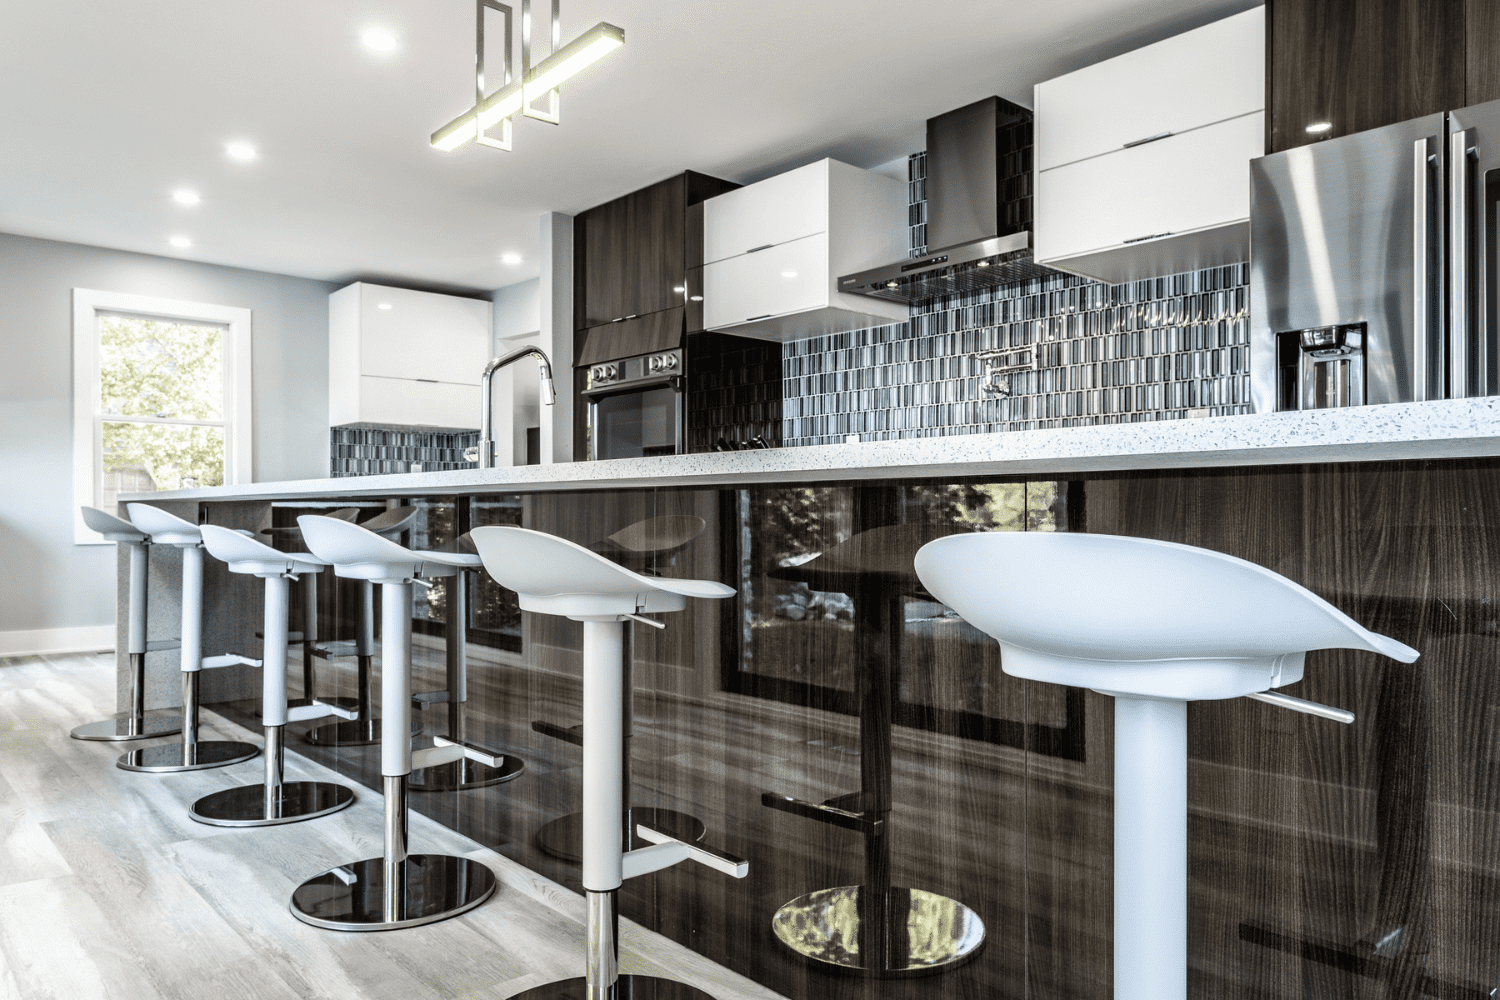 Nicholas Design Build | A modern kitchen with white counter tops and black bar stools.